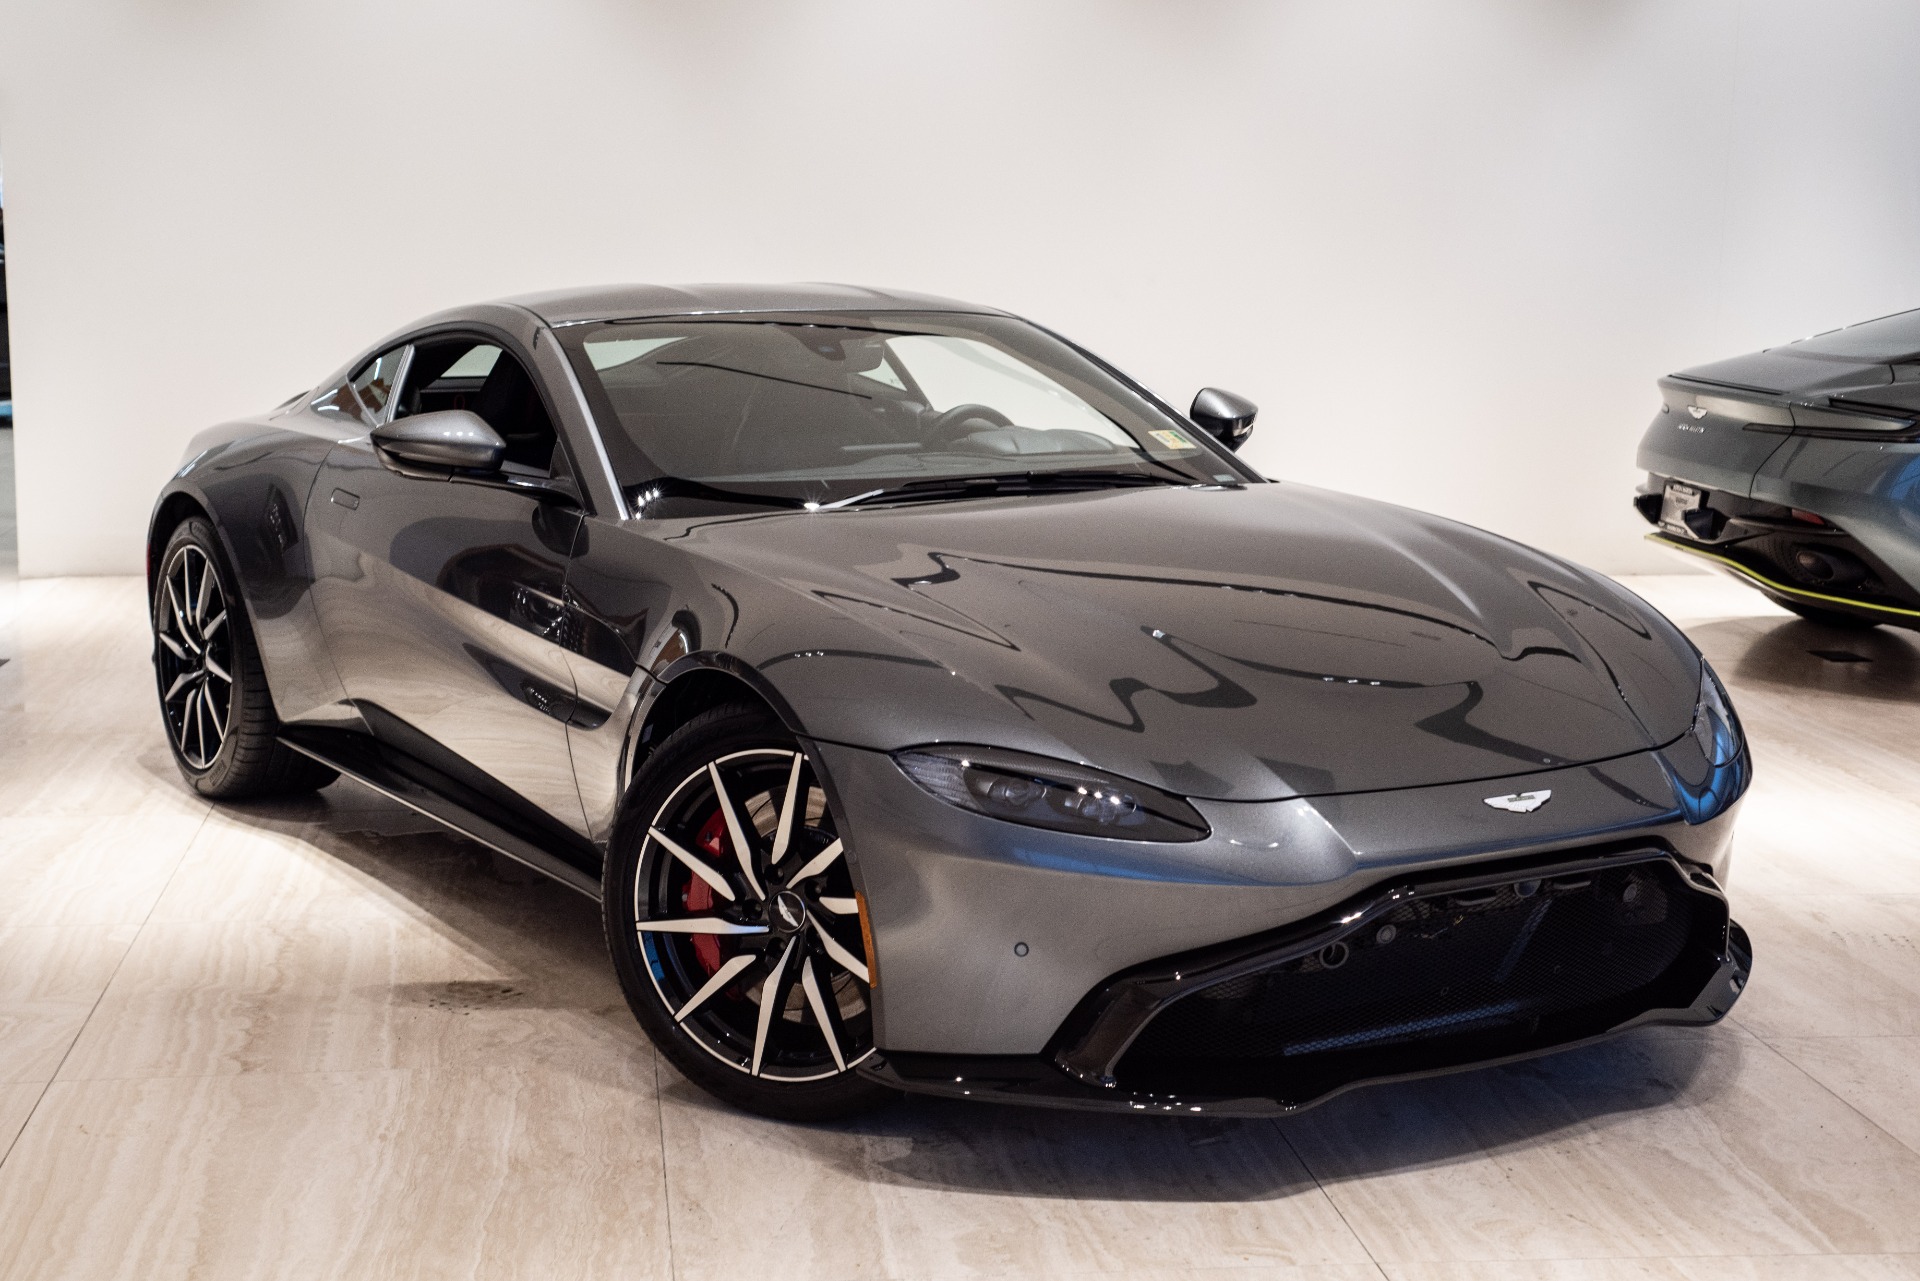 Unlock The Power Of Possibilities With The 2019 Aston Martin Vantage